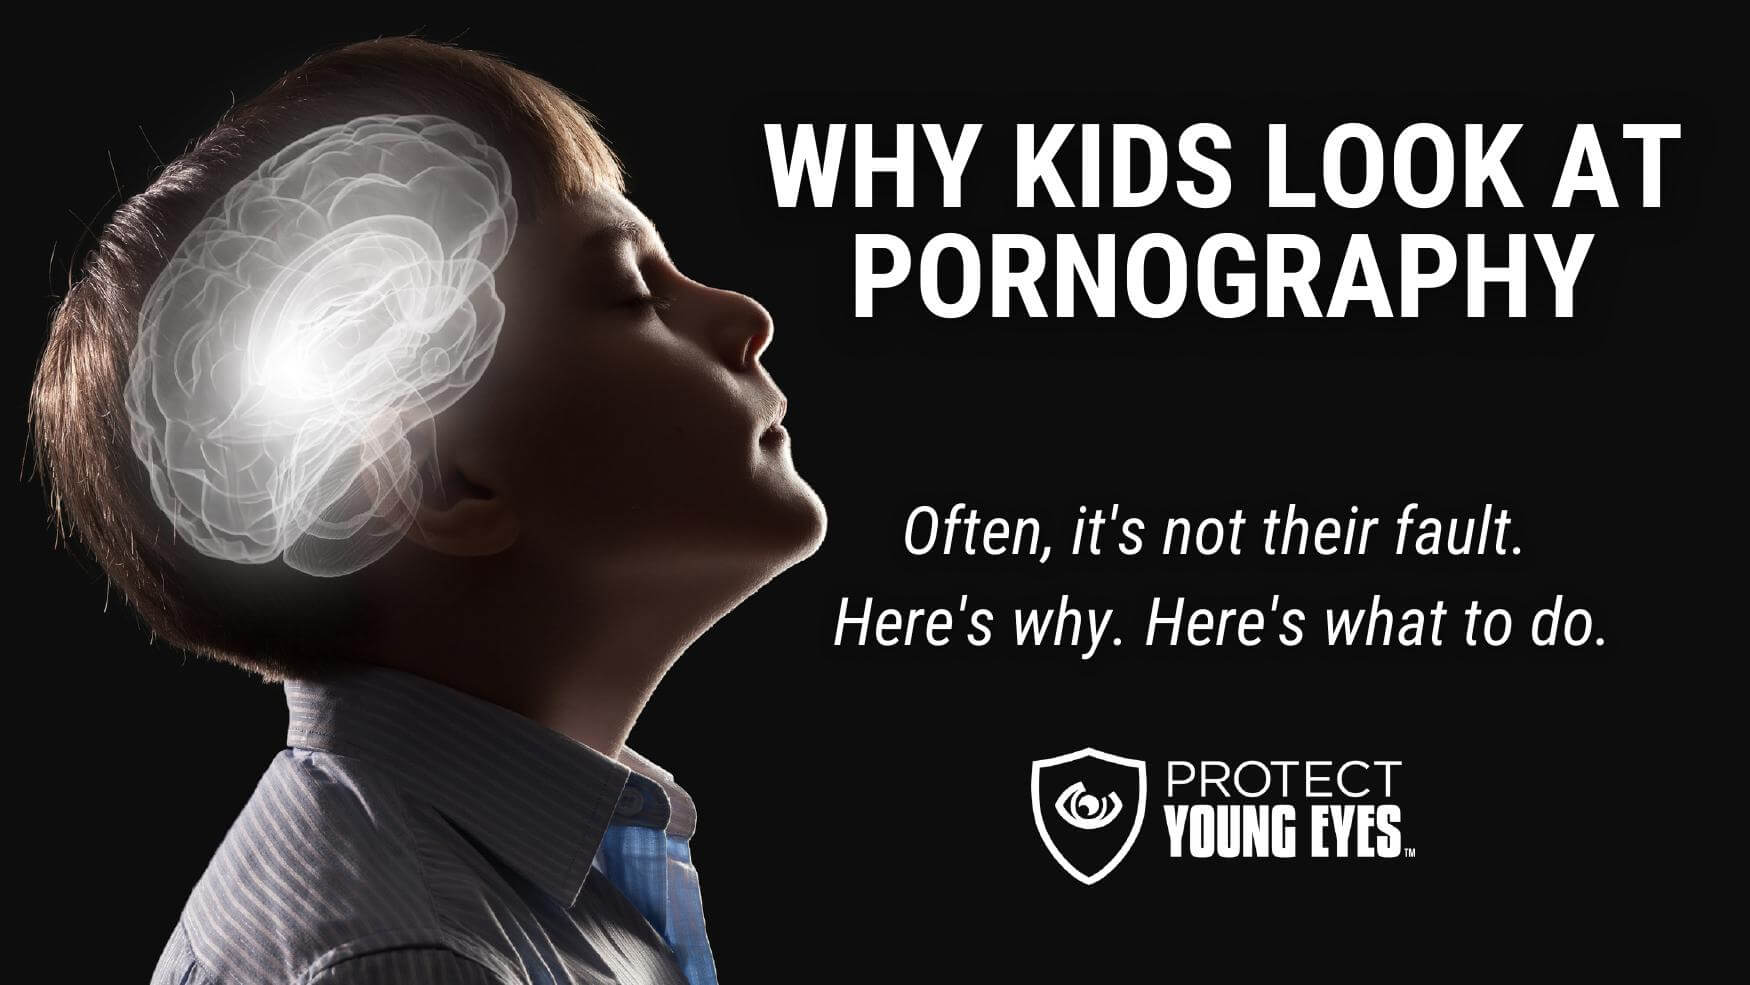 Pronography - Why Kids Look at Pornography (It's not their fault) - Protect Young Eyes